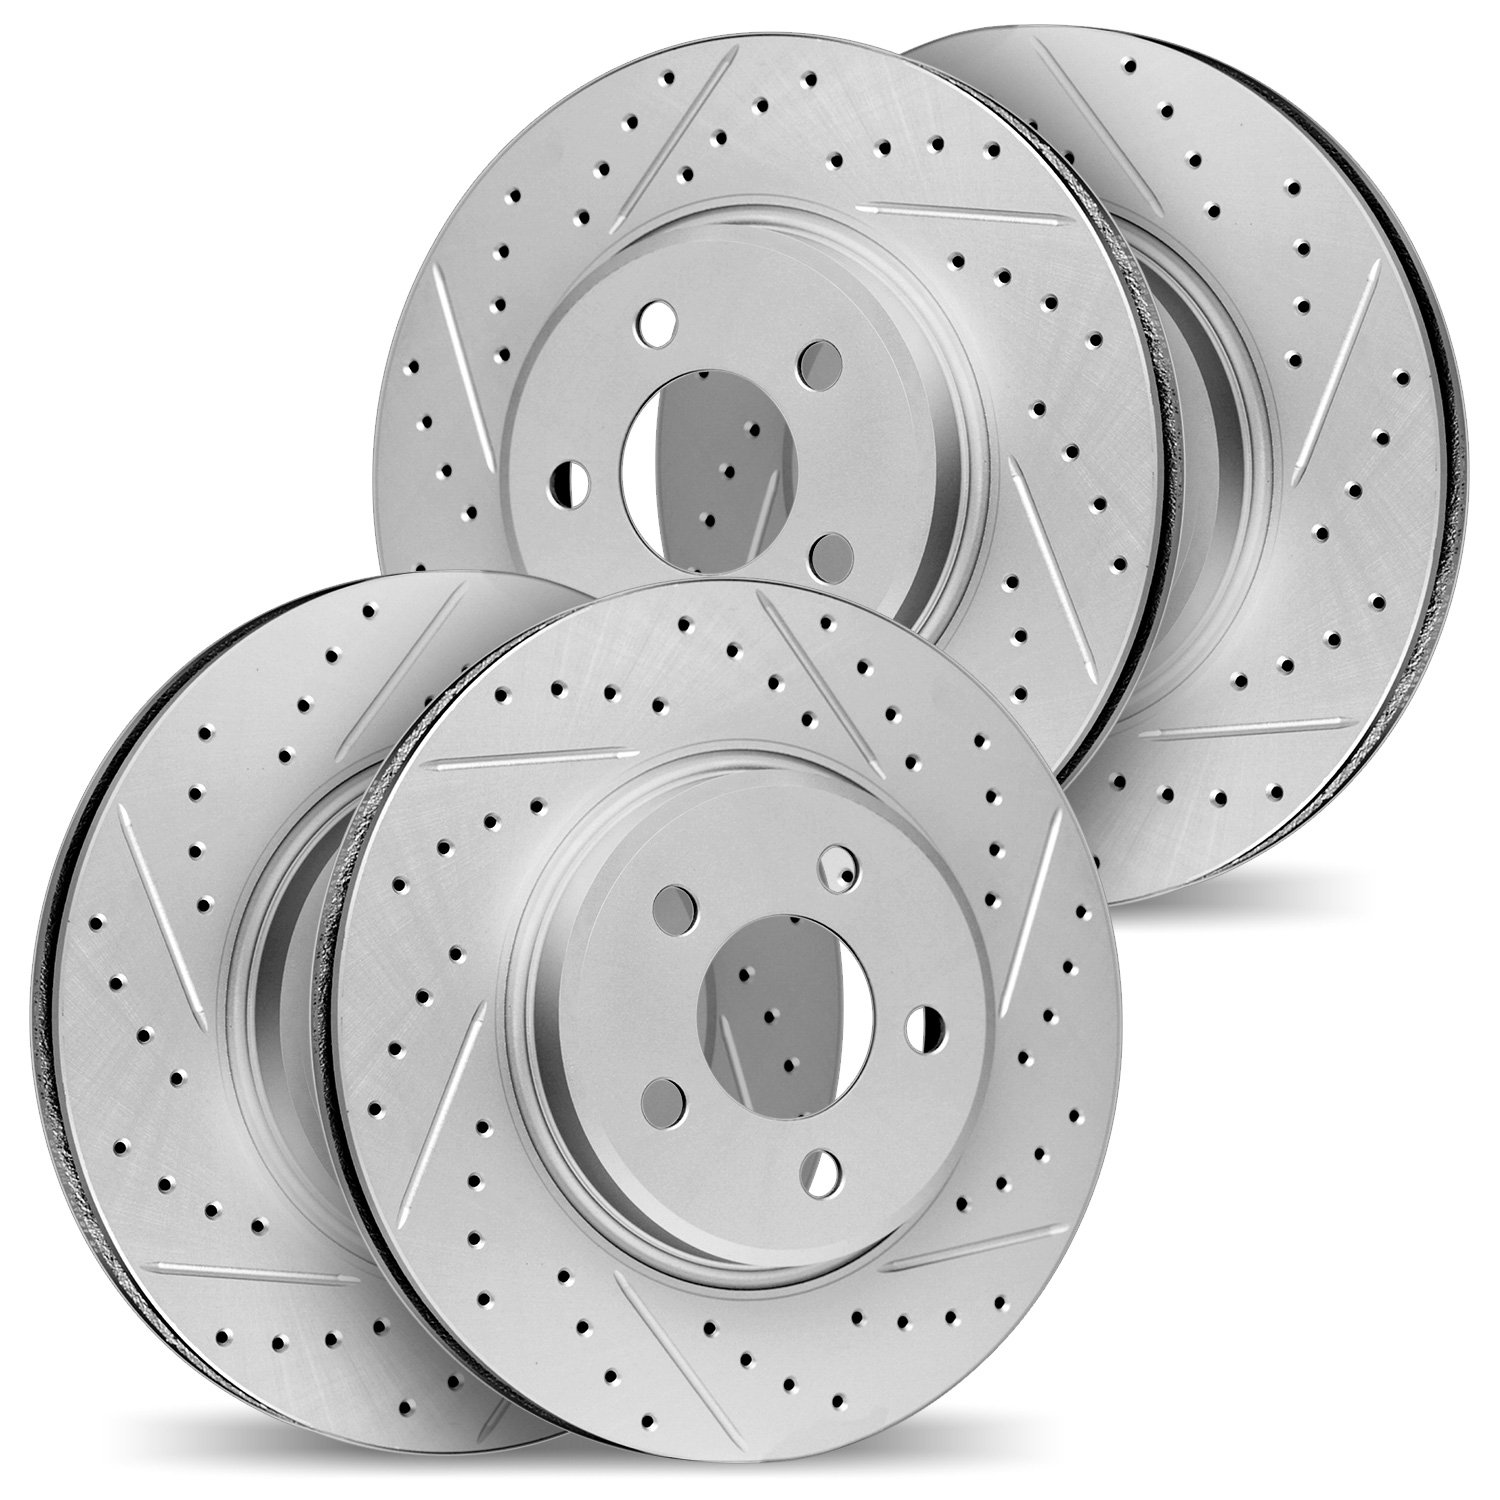 2004-63038 Geoperformance Drilled/Slotted Brake Rotors, 2007-2009 Mercedes-Benz, Position: Front and Rear